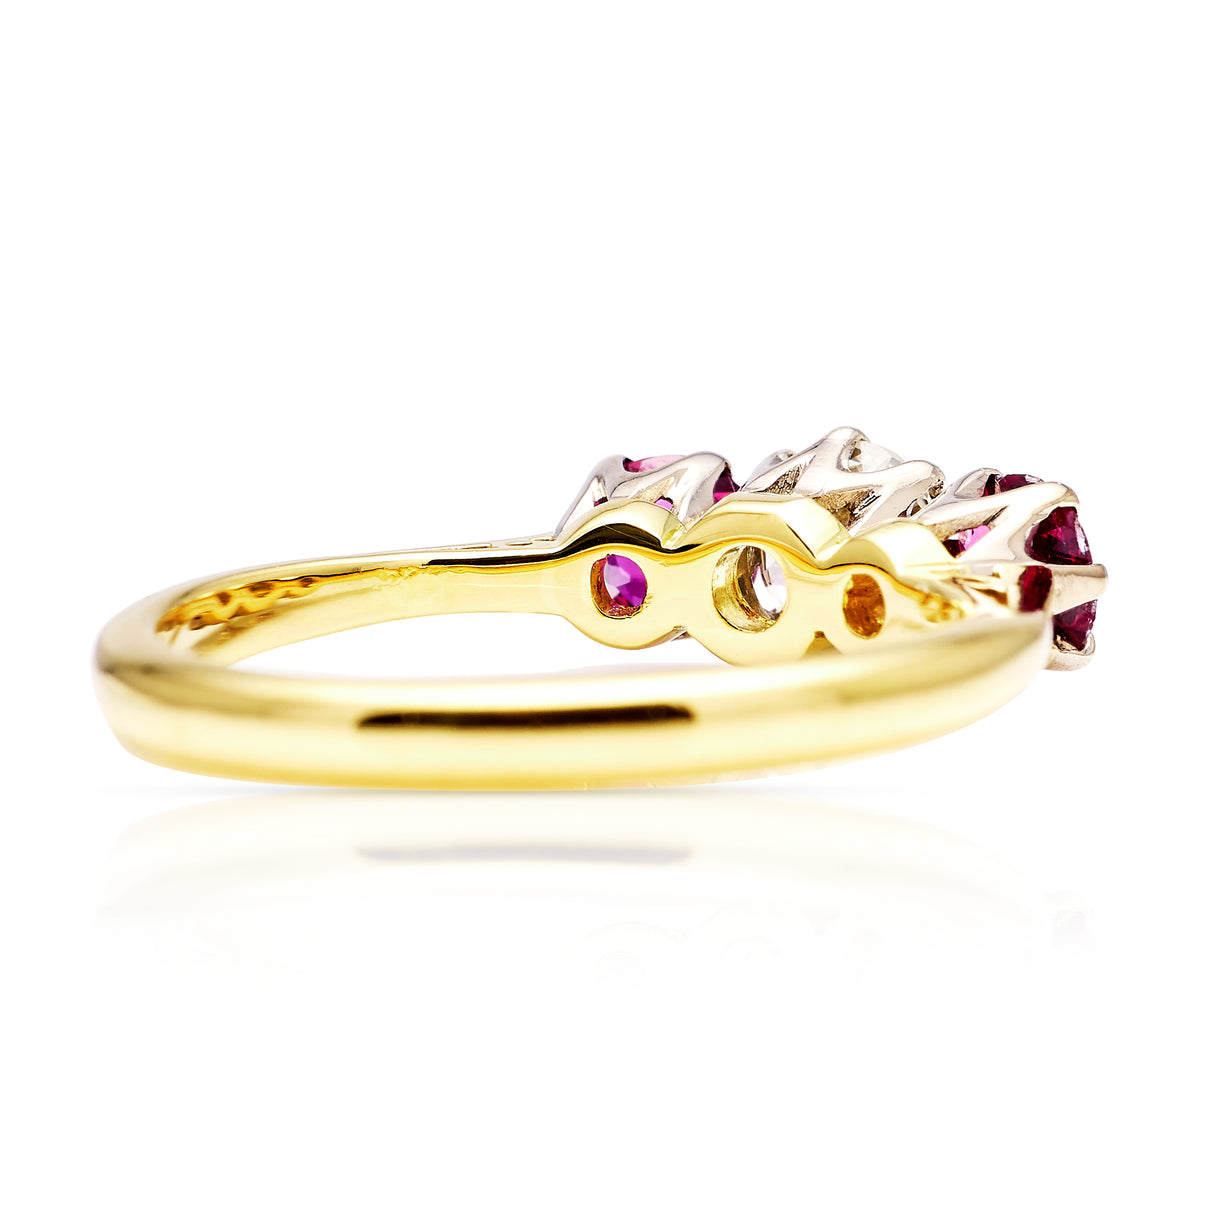 Antique, Edwardian Three-Stone Ruby and Diamond Engagement Ring, 18ct Yellow Gold and Platinum